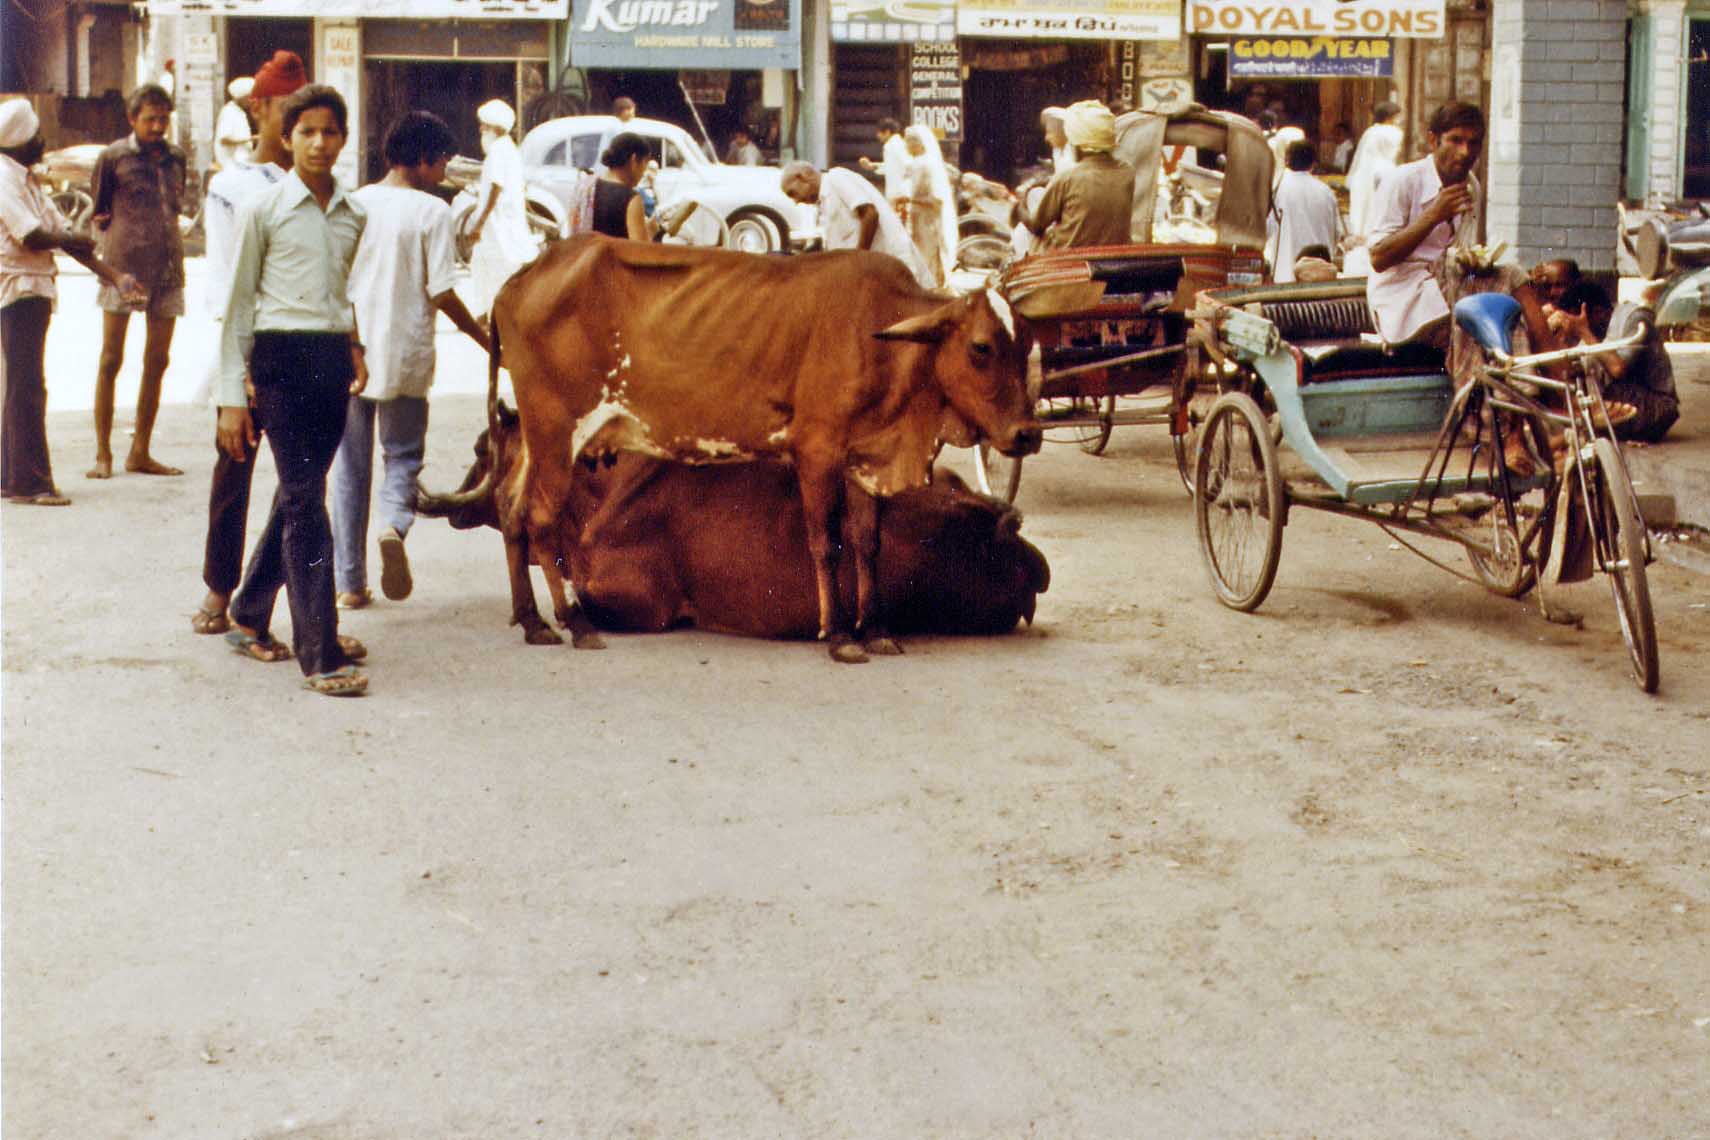 Holy cows in the street of Amritsar India